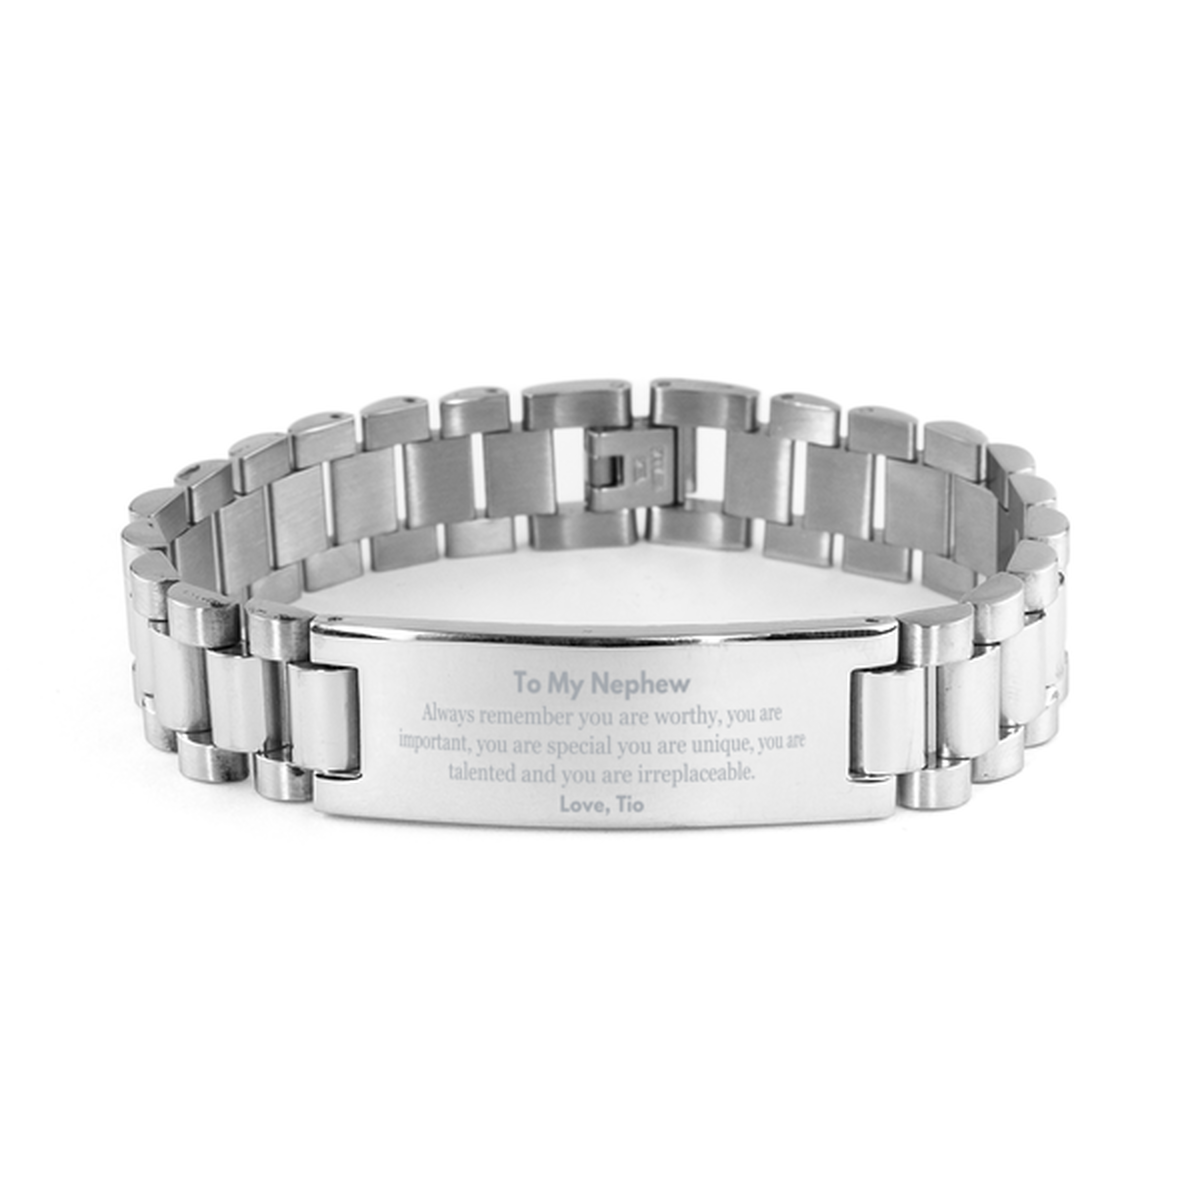 Nephew Birthday Gifts from Tio, Inspirational Ladder Stainless Steel Bracelet for Nephew Christmas Graduation Gifts for Nephew Always remember you are worthy, you are important. Love, Tio